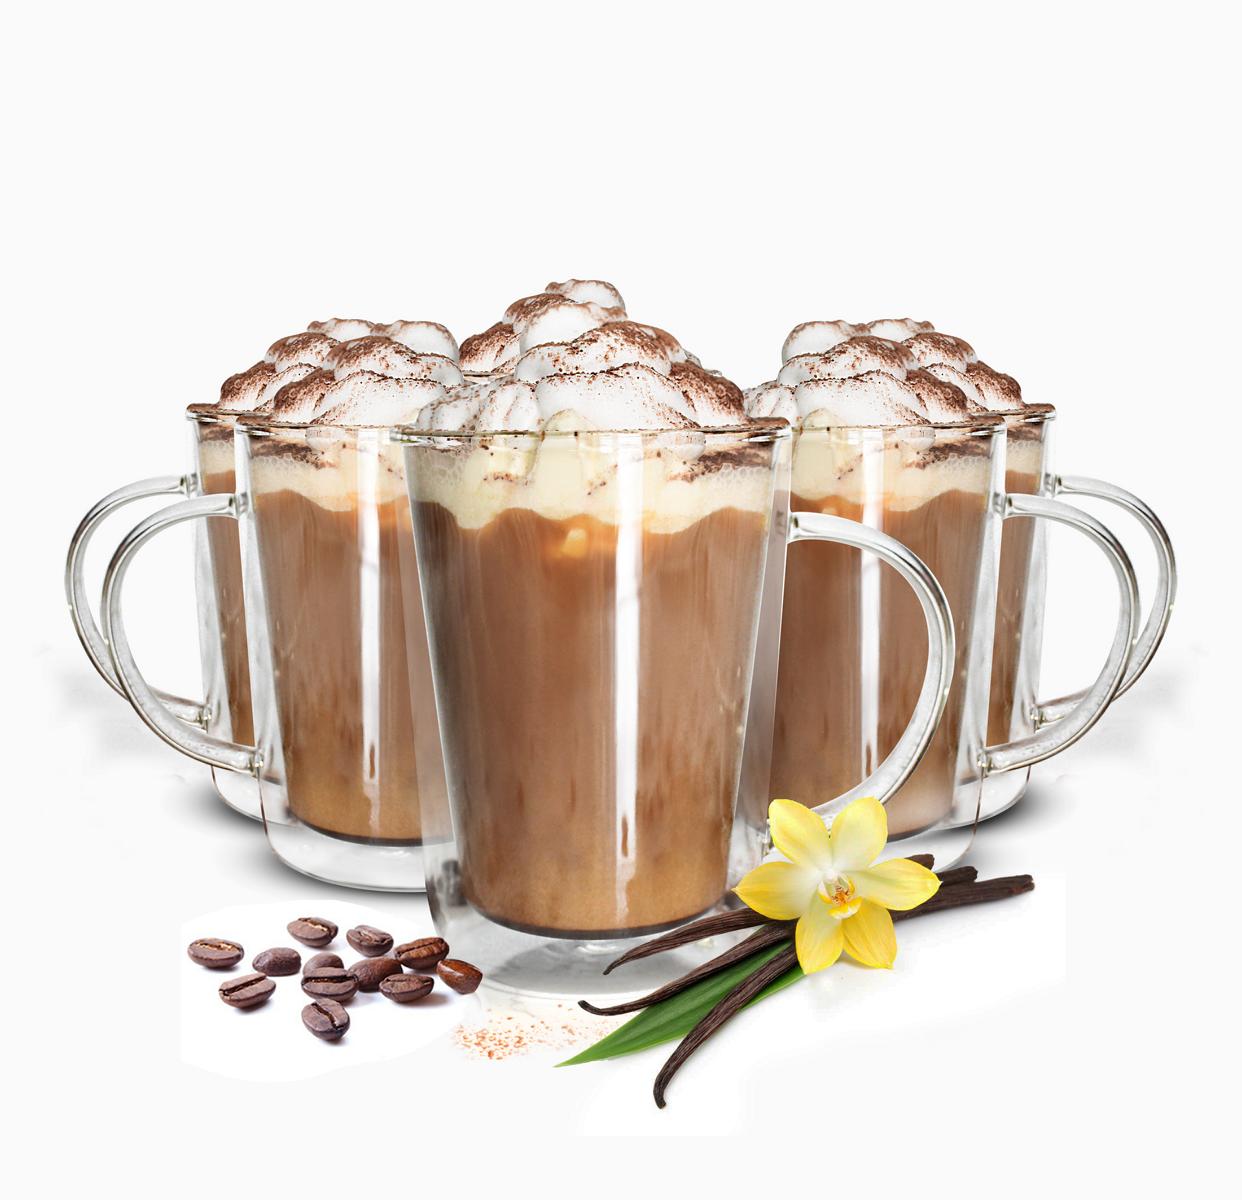 4 double-walled glasses with handles 360ml latte macchiato drinking glass coffee glasses